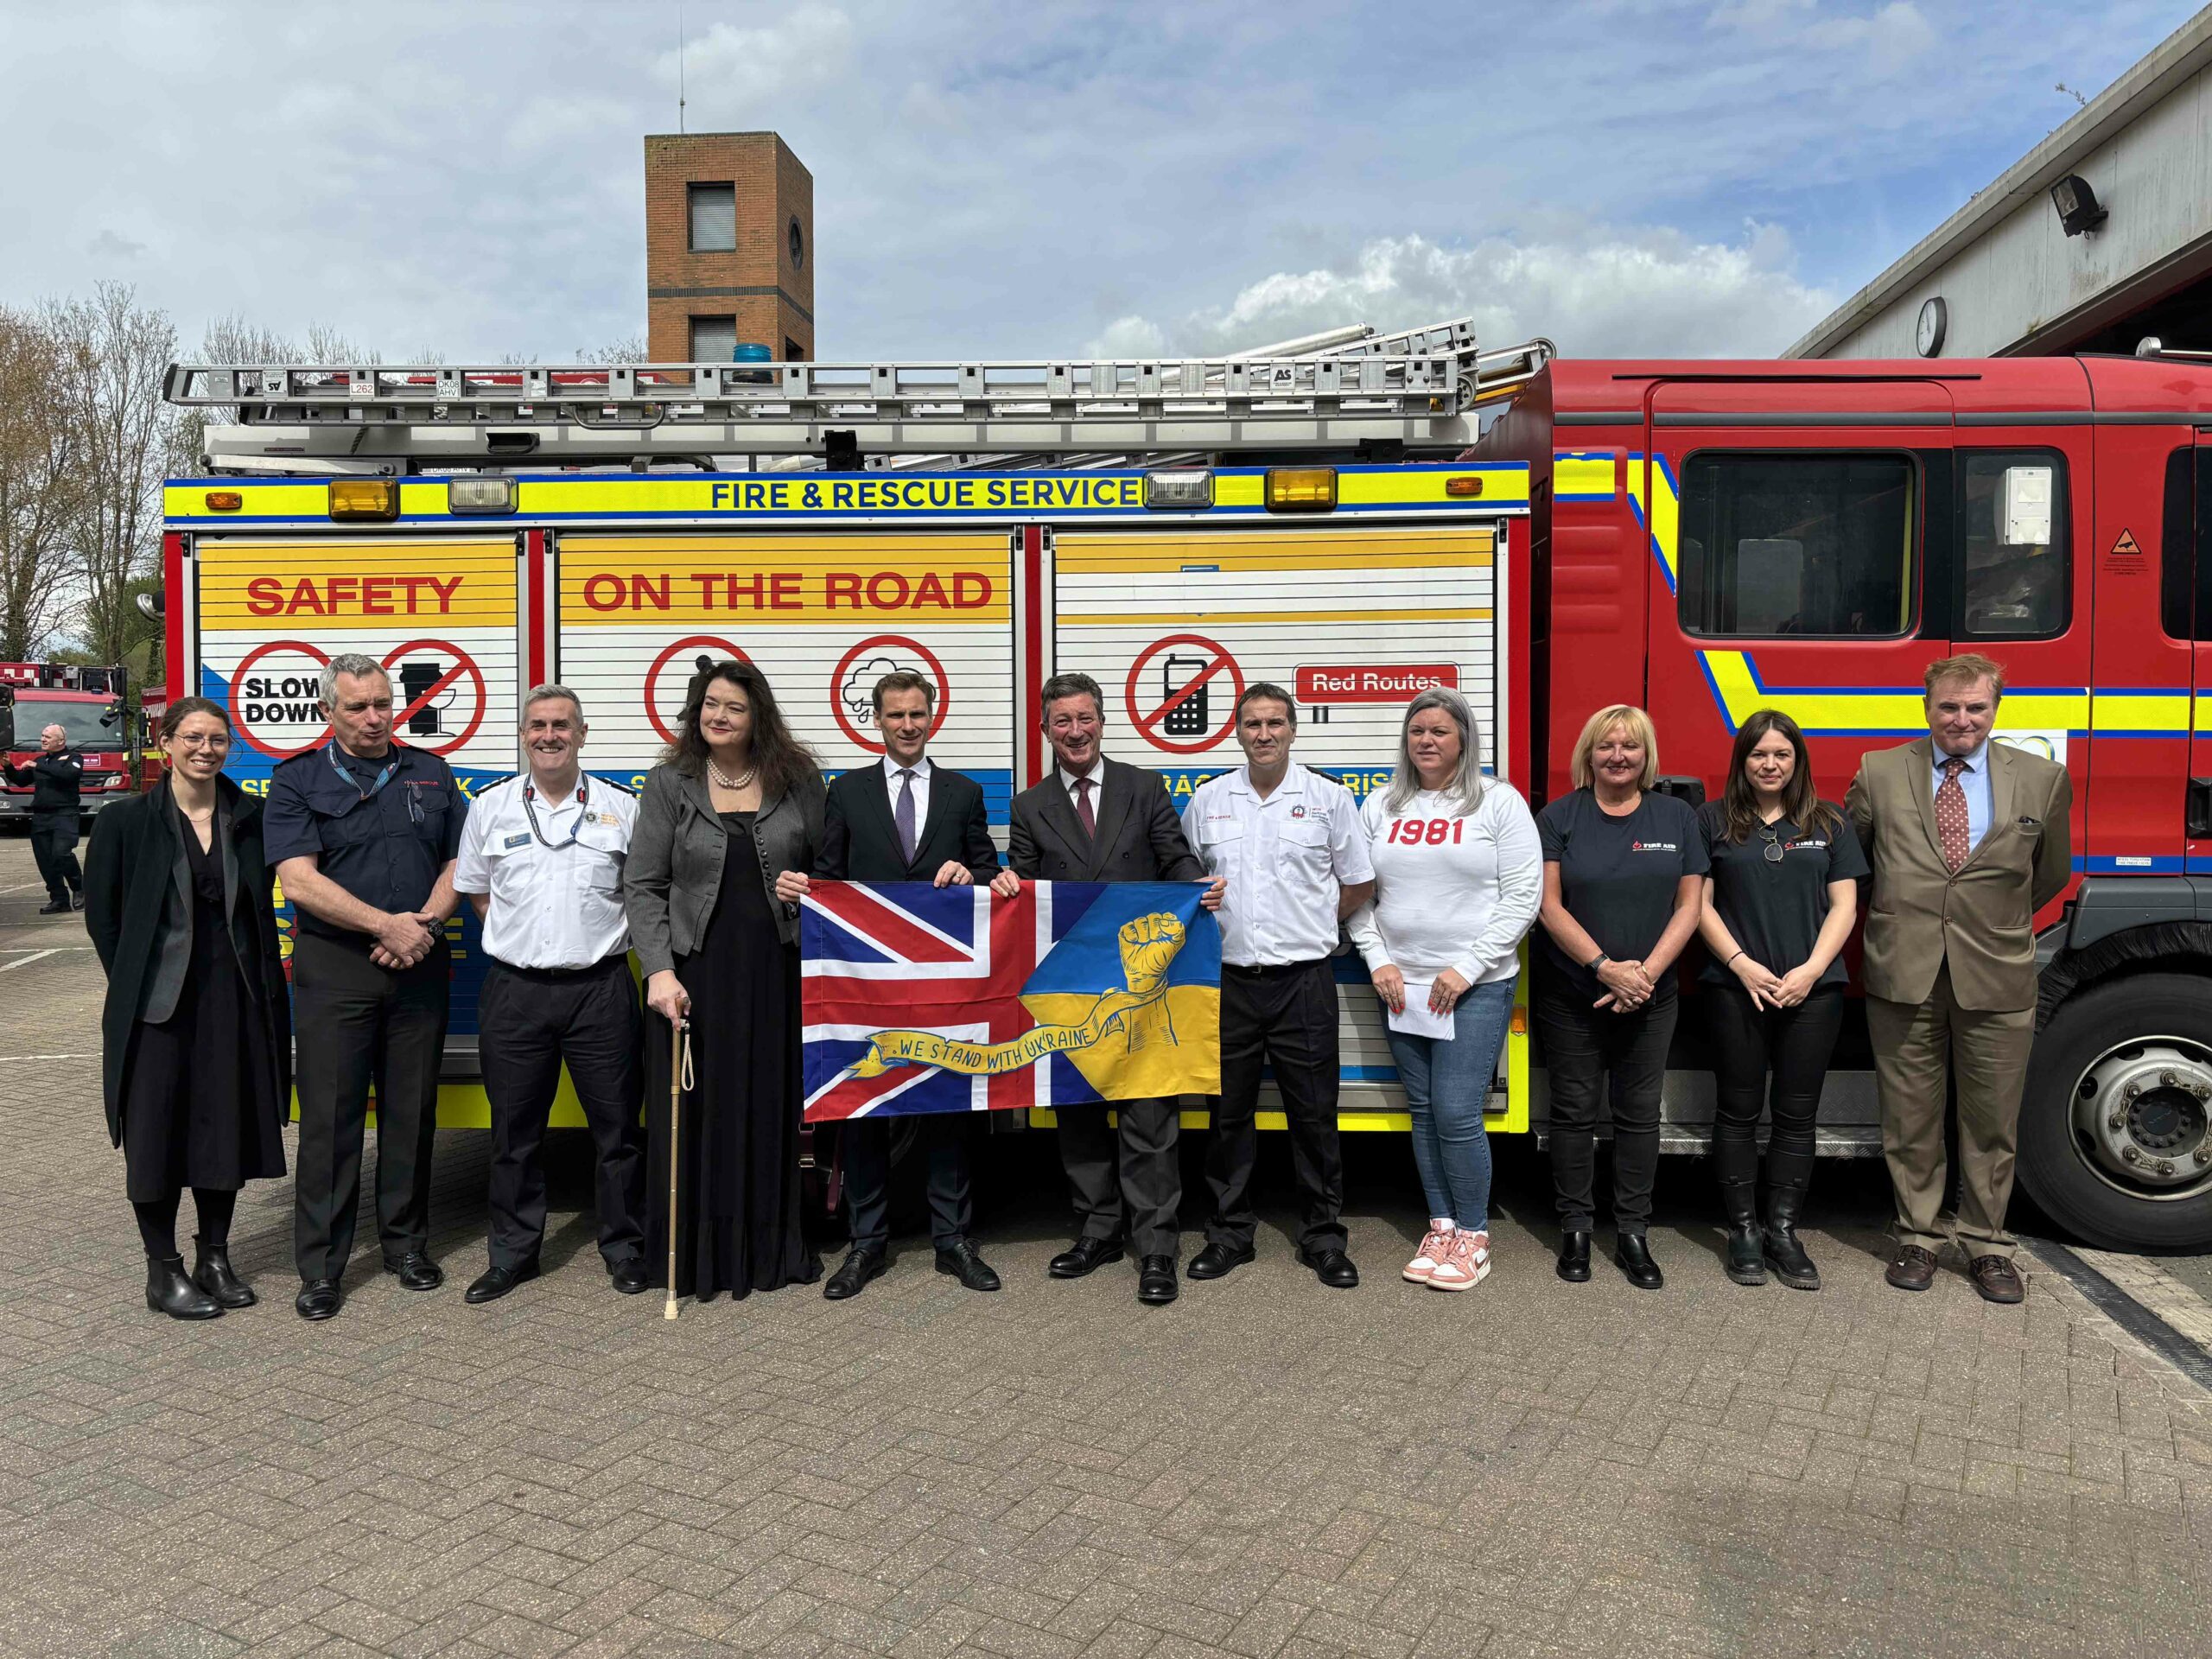 Minister with representatives from NFCC, National Resilience, FIRE AID, Fire Industry Association, and Kent Fire and Rescue Service.